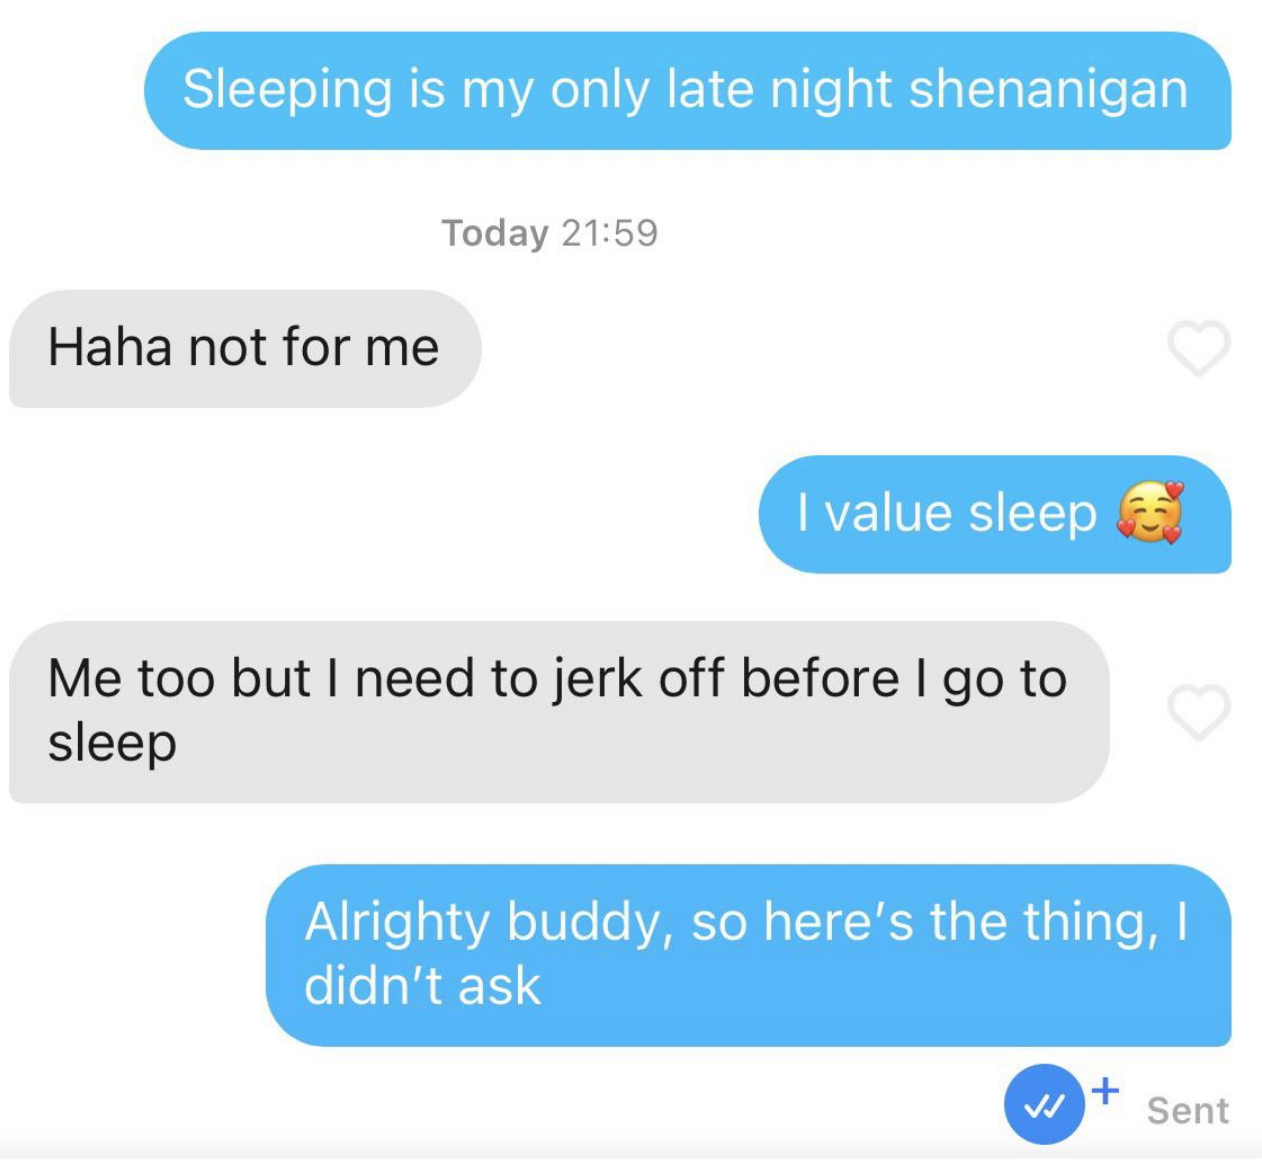 &quot;Sleeping is my only late night shenanigan&quot;; response: &quot;I need to jerk off before I go to sleep&quot;; &quot;Alrighty buddy, so here&#x27;s the thing, I didn&#x27;t ask&quot;